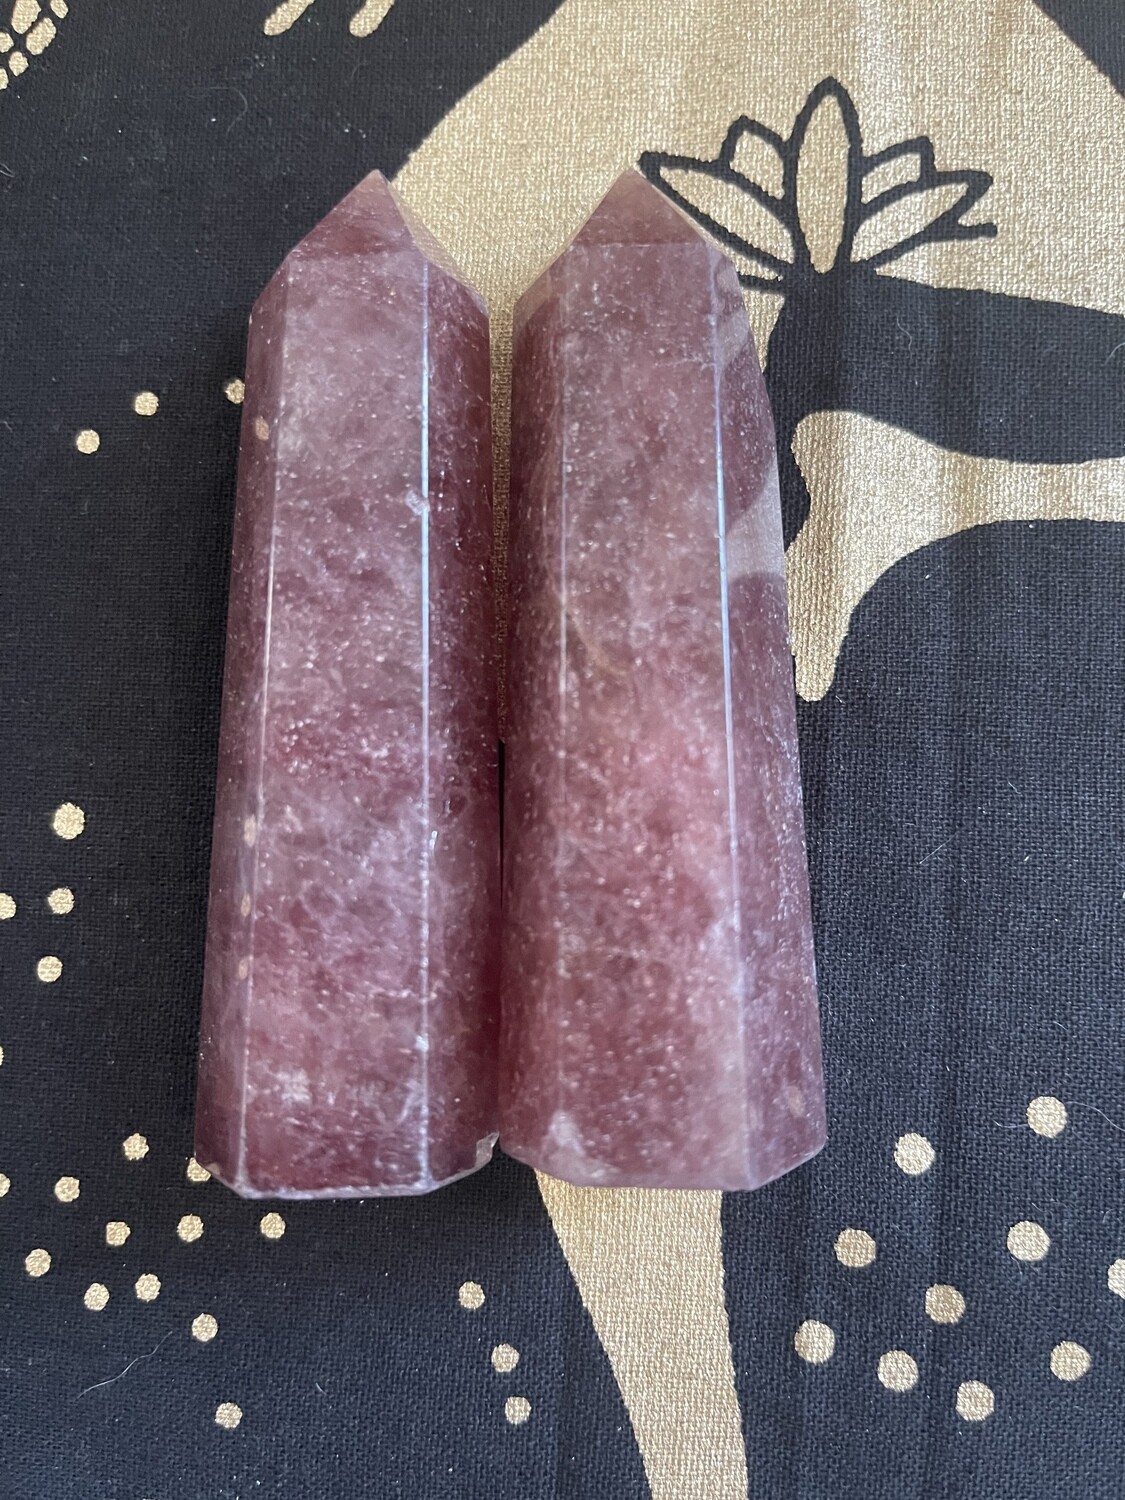 Strawberry quartz tower 2 available